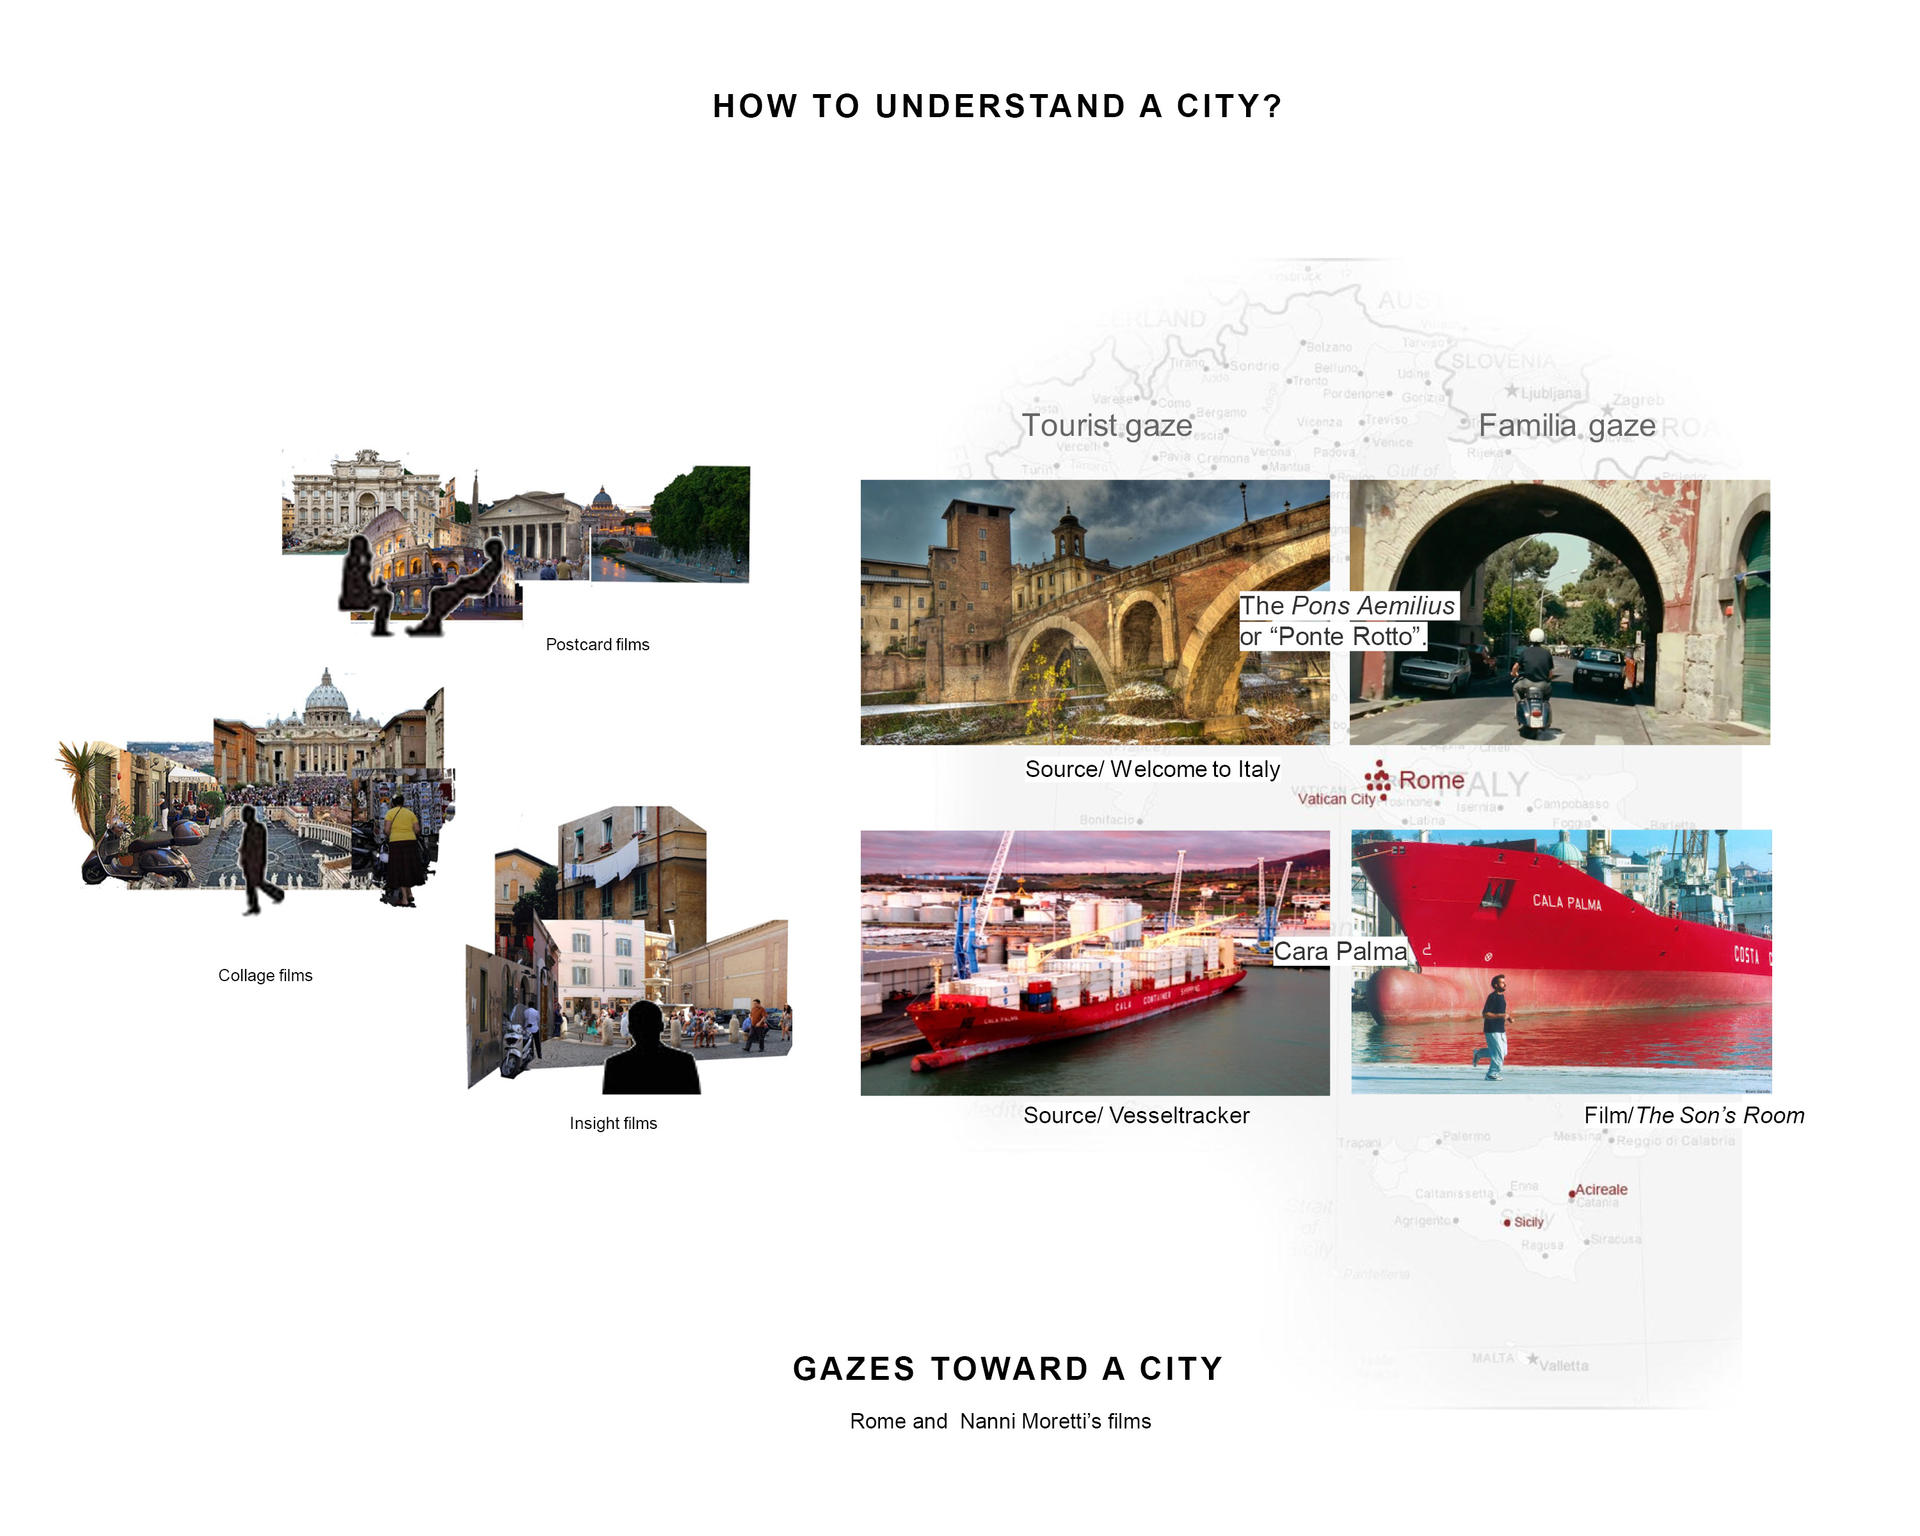 HOW TO LOOK AT A CITY?